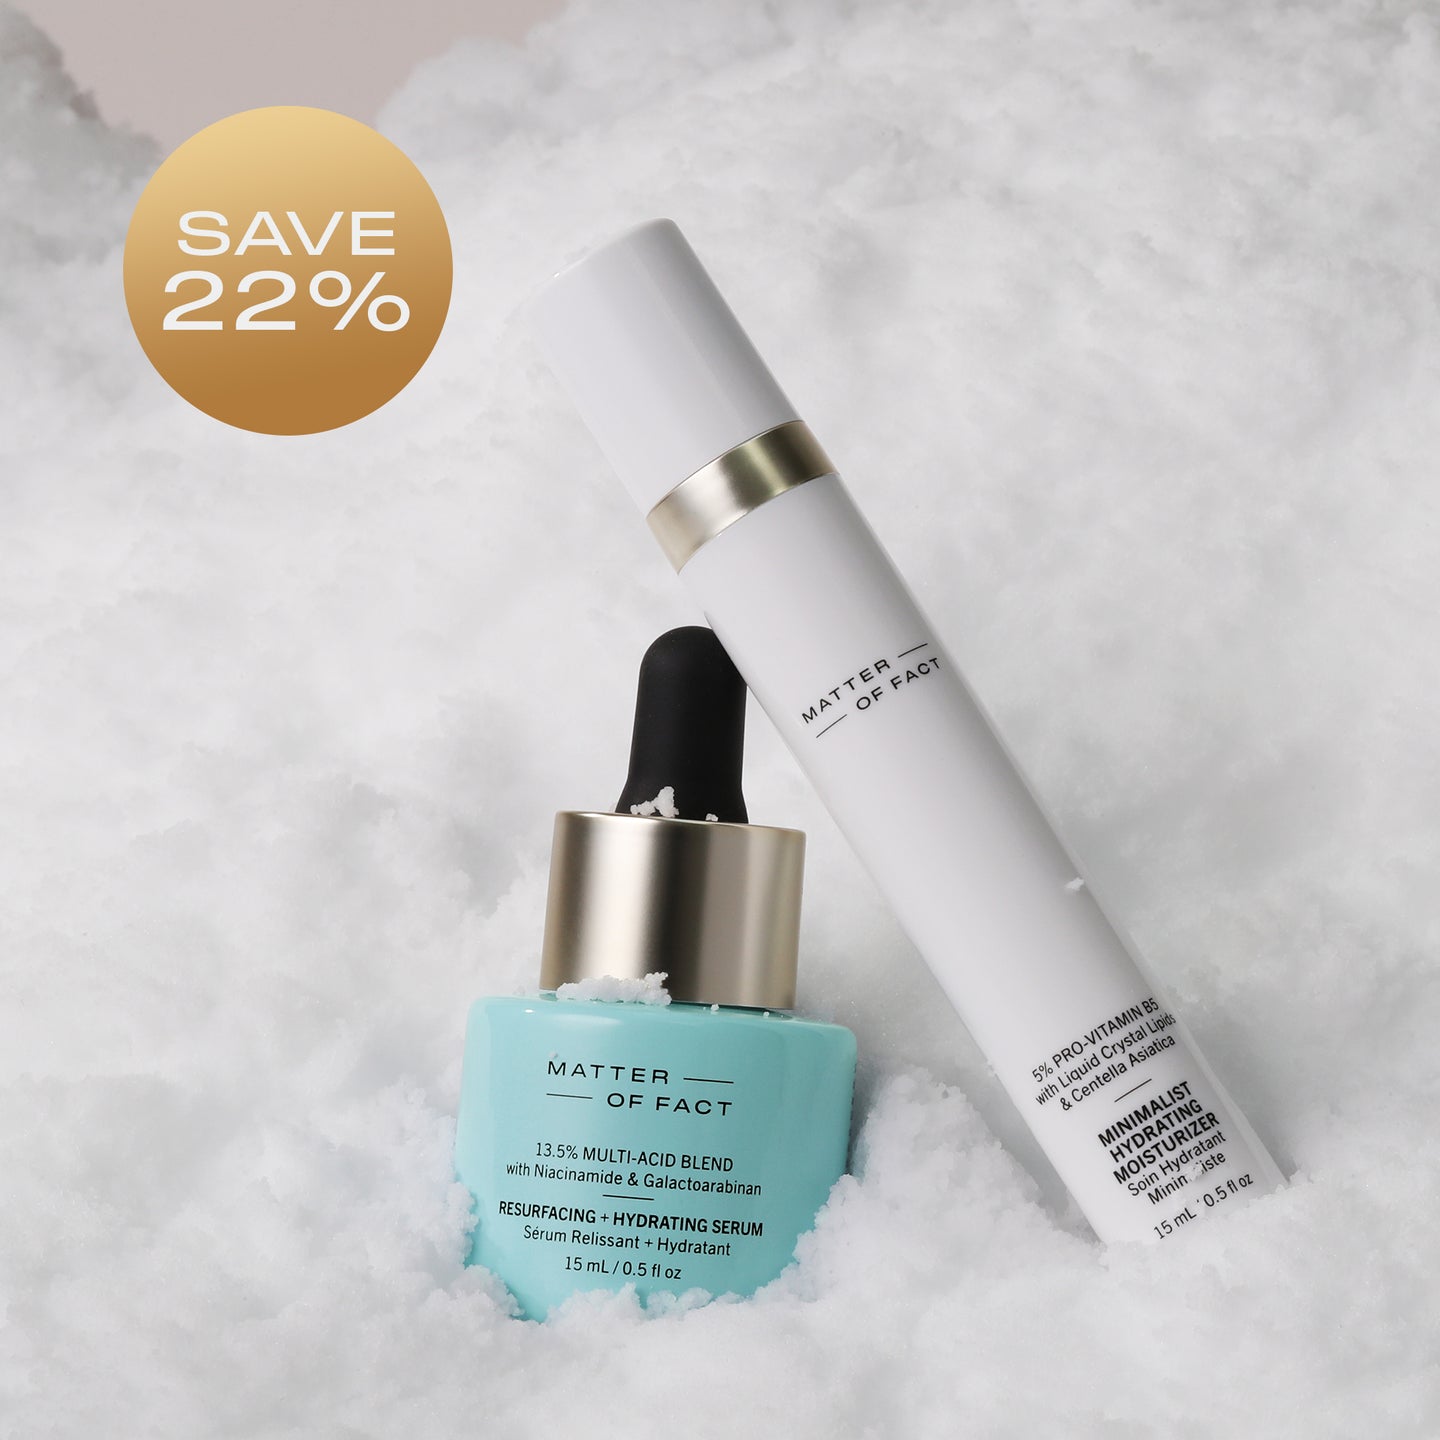 RESURFACING + HYDRATING SERUM and MINIMALIST HYDRATING MOISTURIZER on snow showing percent savings for the duo